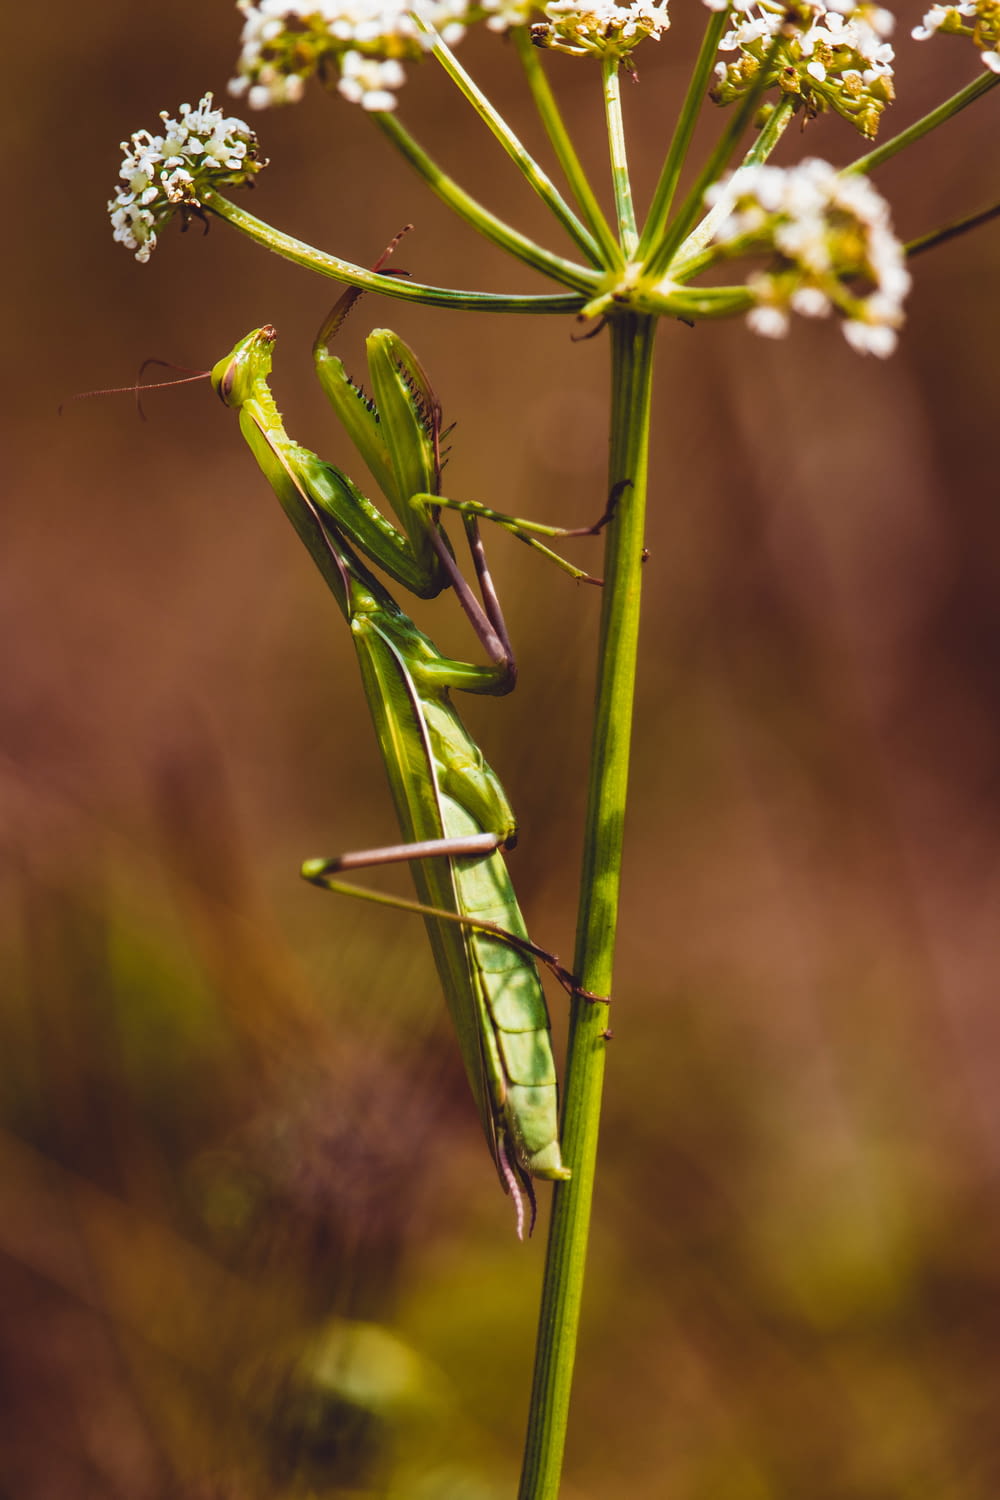 green praying mantis perched on brown stem in close up photography during daytime